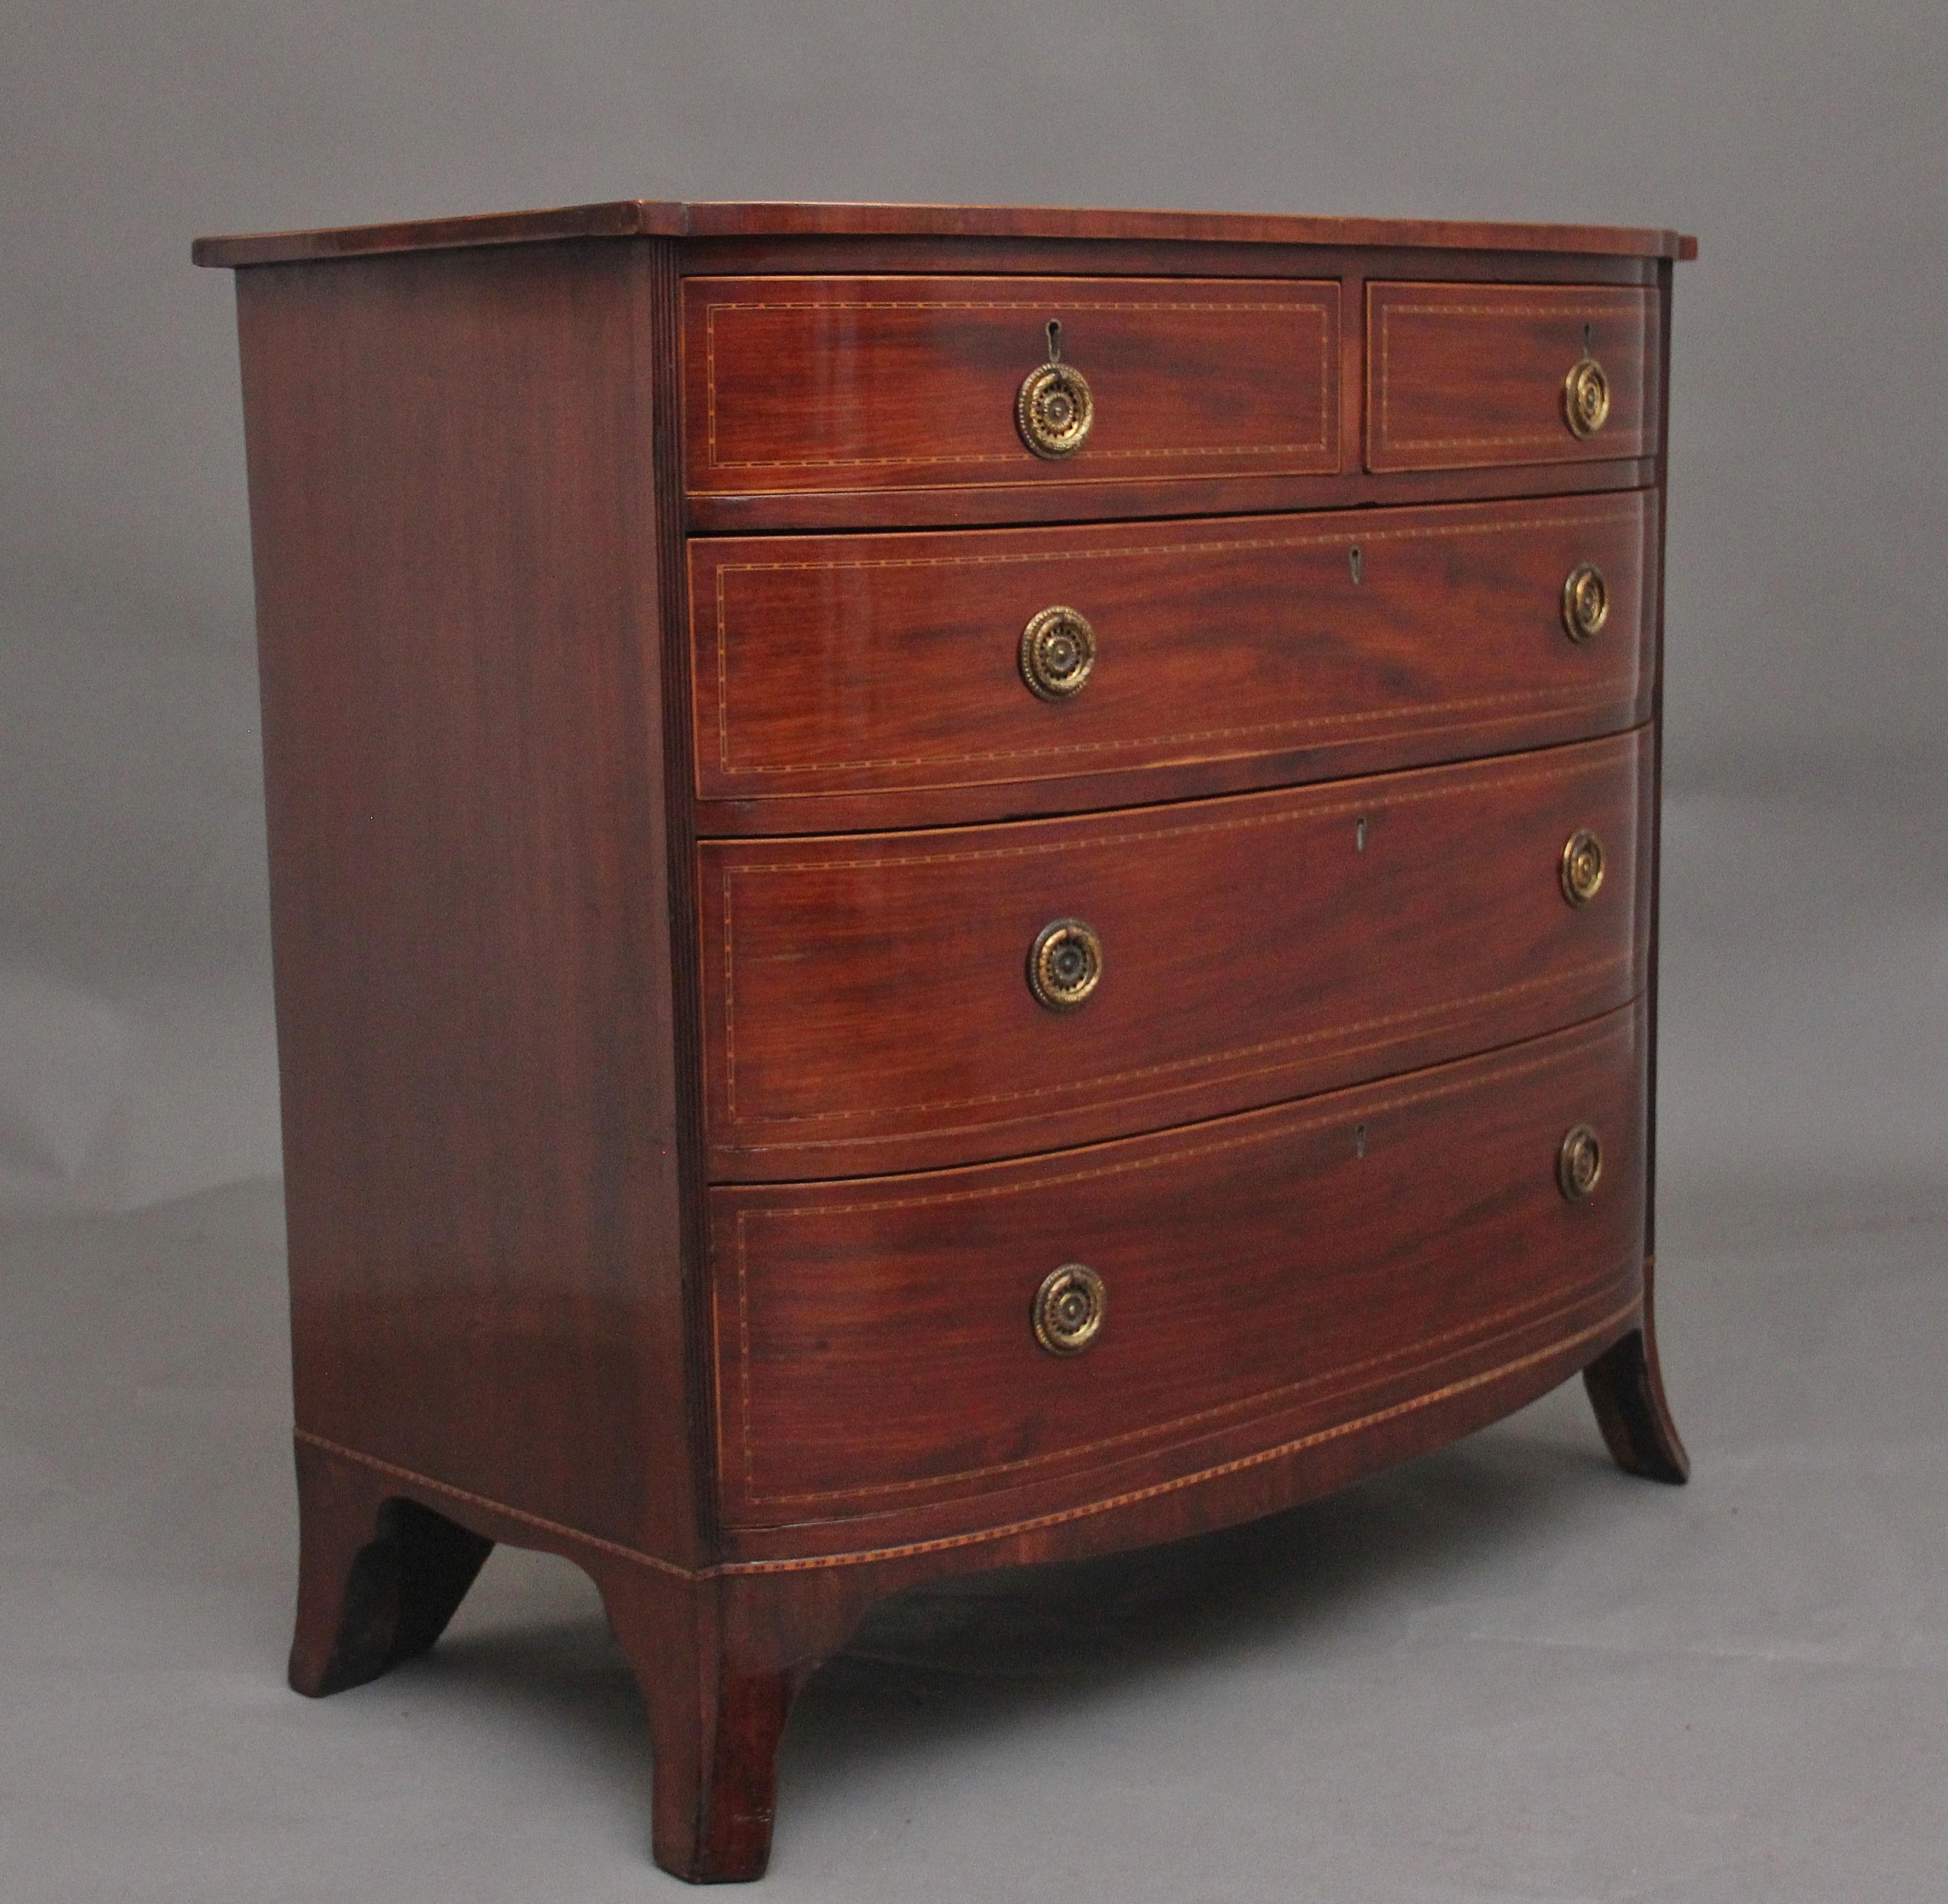 19th Century mahogany bowfront chest of drawers, having a nice figured shaped top with decorative inlay along the edge, two short over three long oak lined drawers with brass ring handles, further decorative inlay on the drawer fronts, supported on